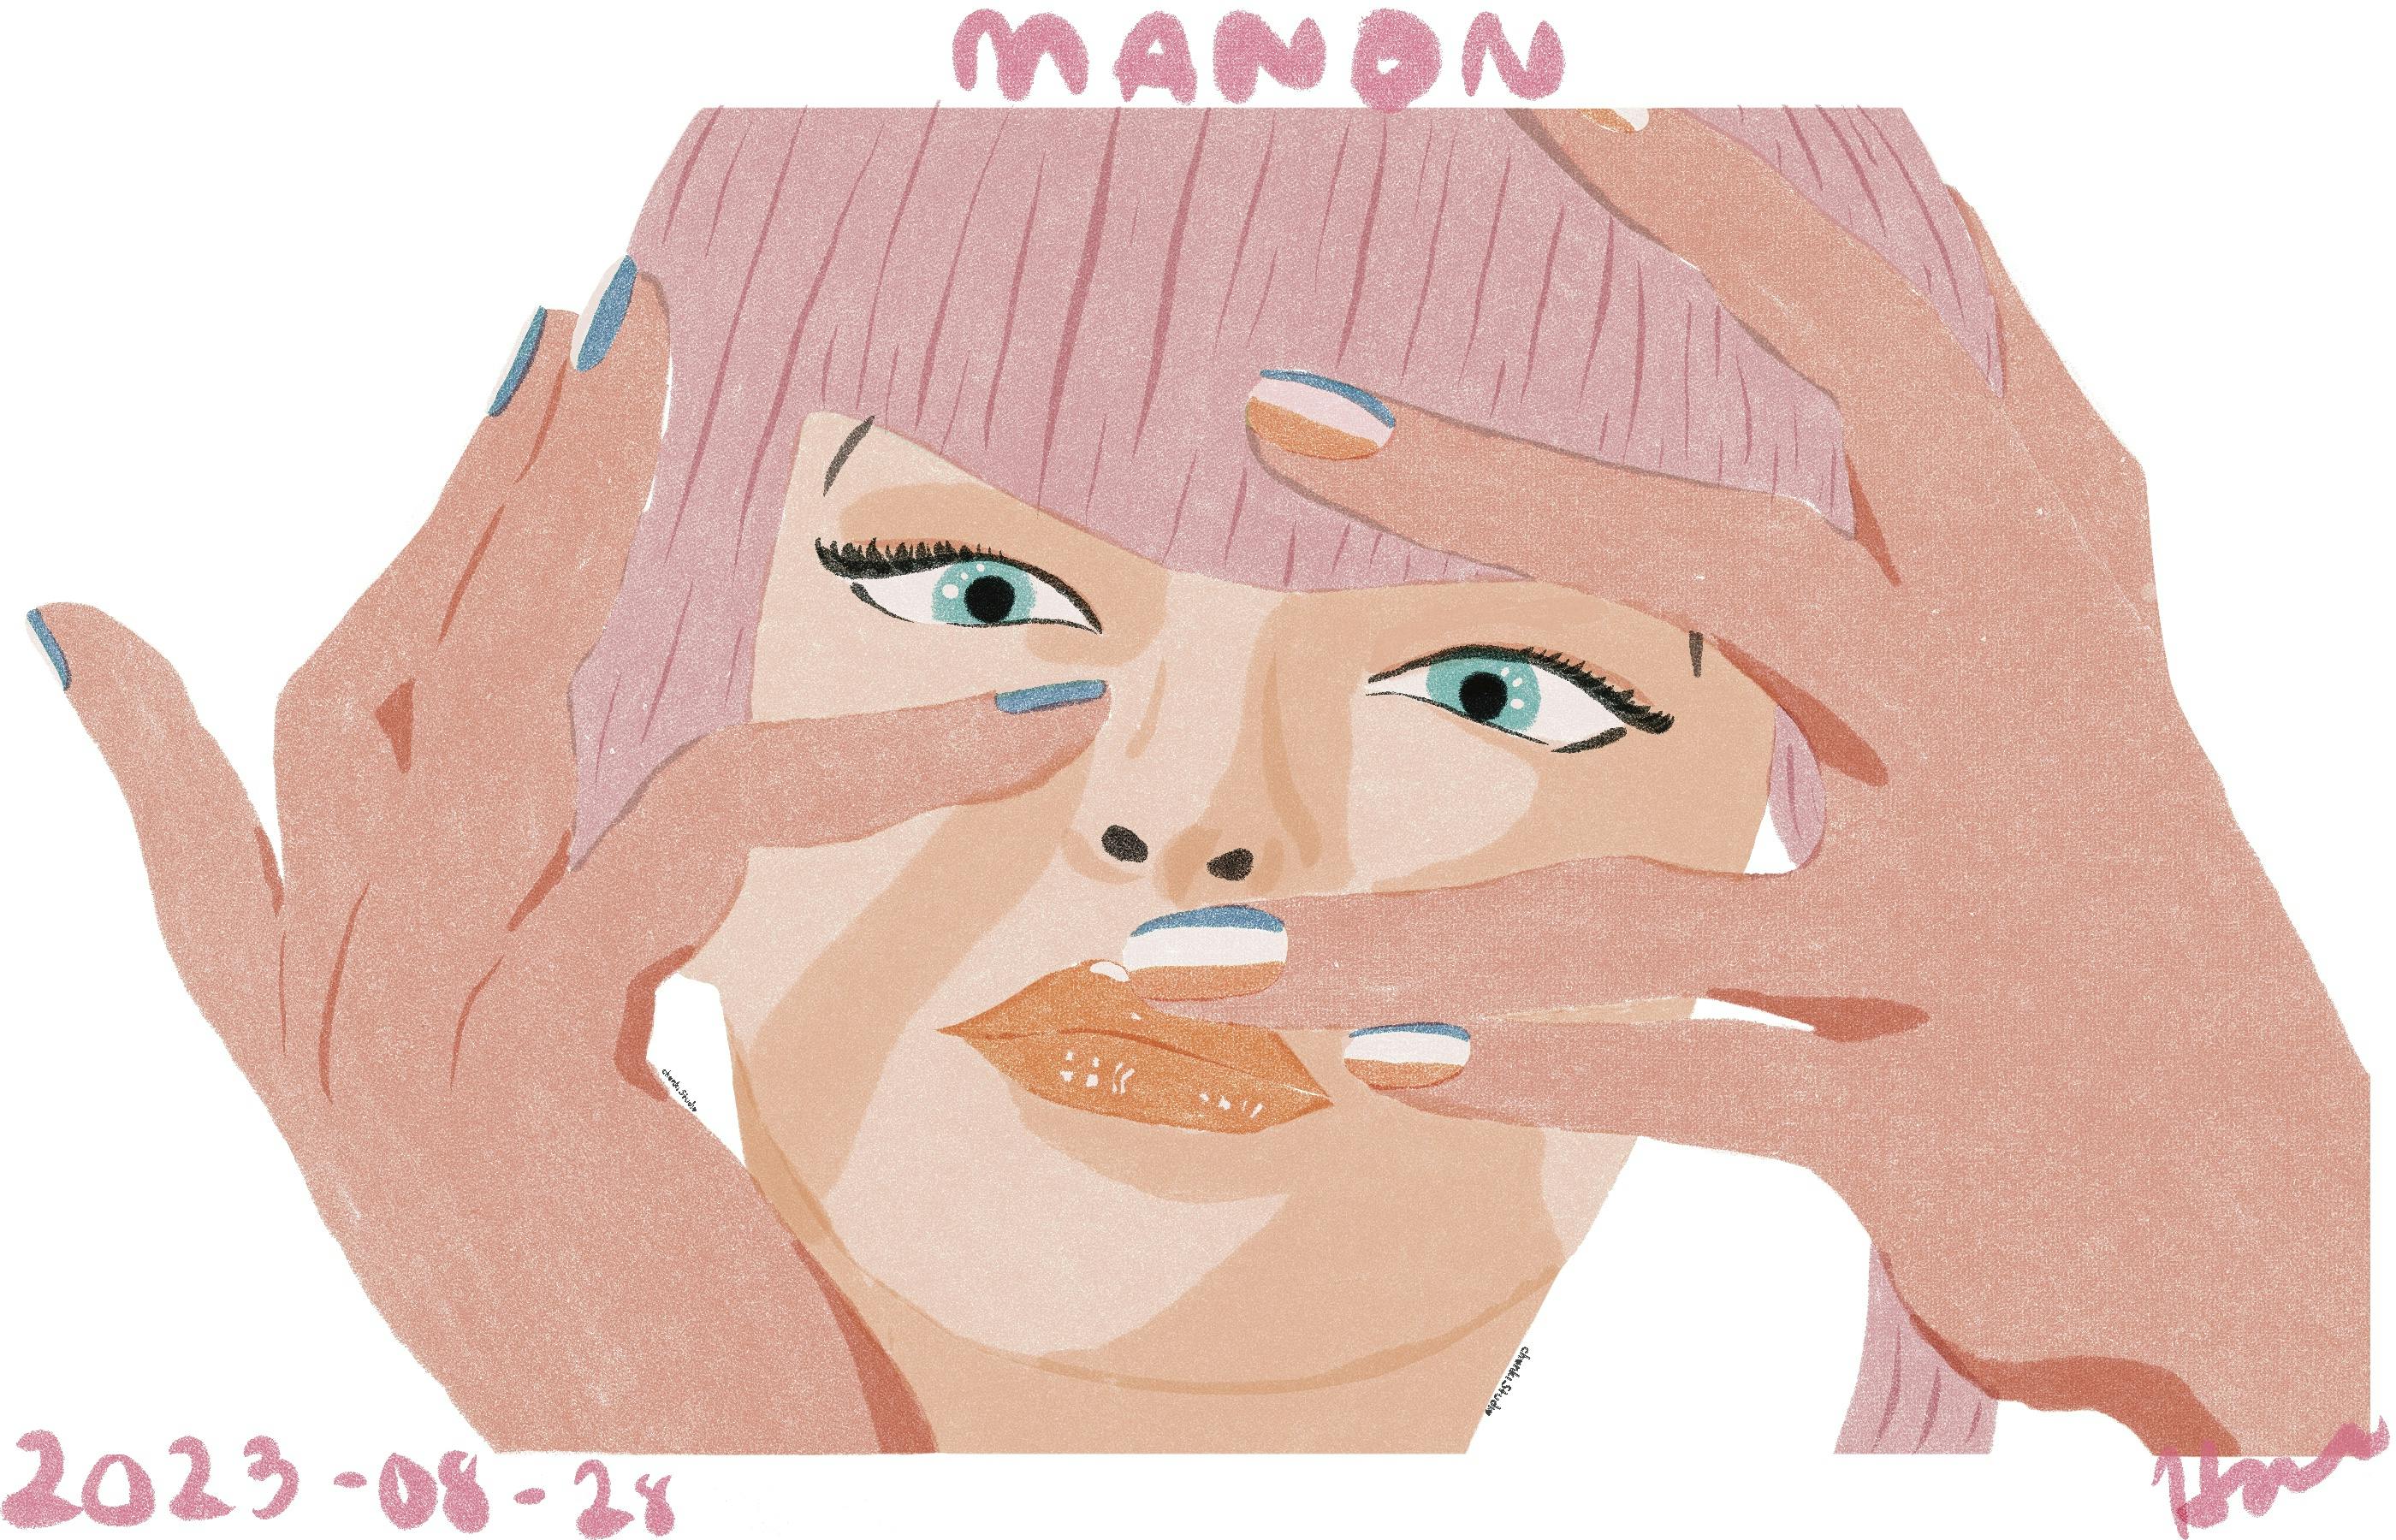 Risography style art print drawn by Hue of SF6's Manon